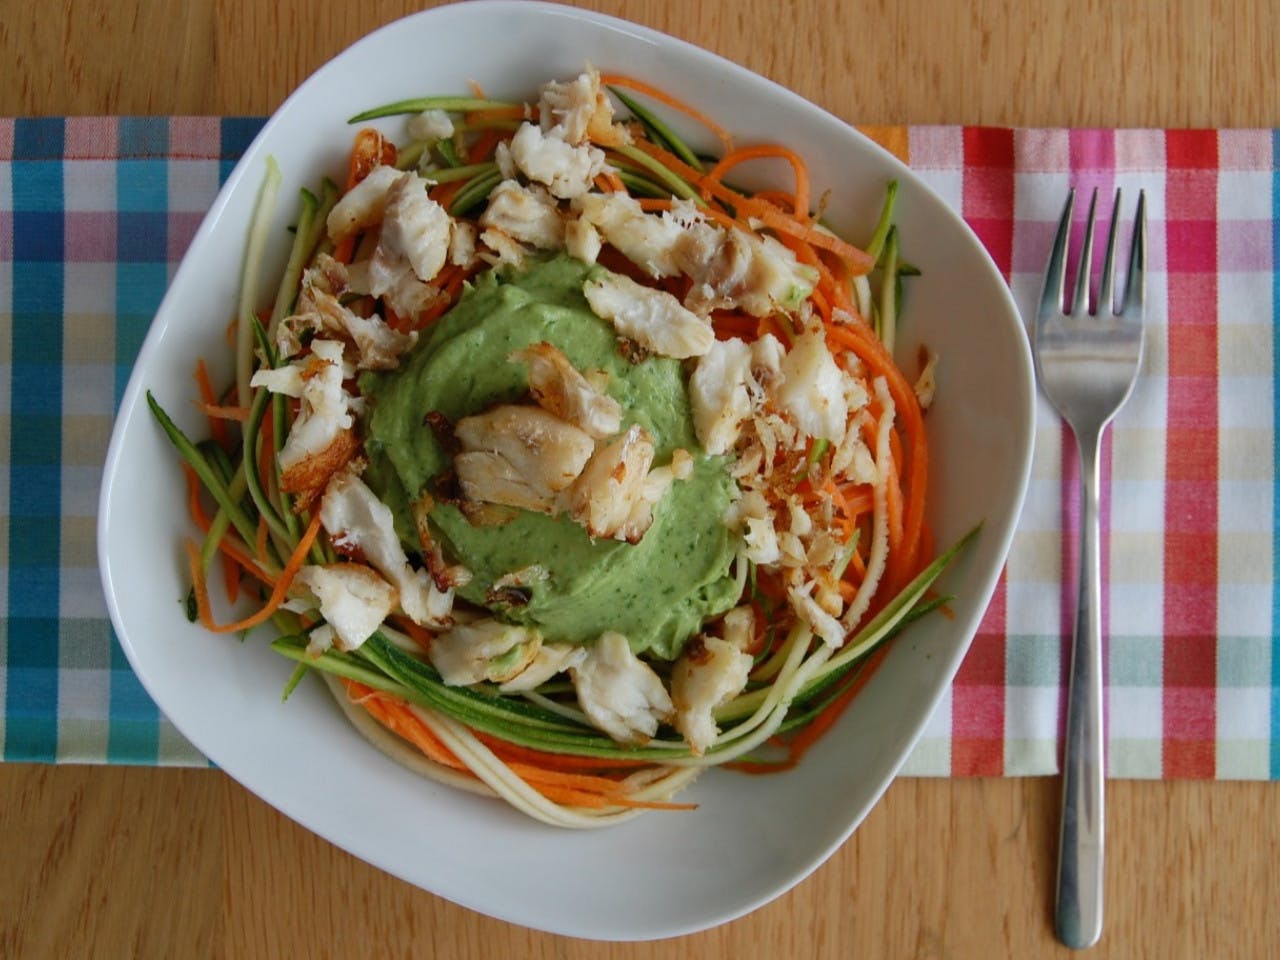 Zucchini carrot pasta with cod and avocado dressing